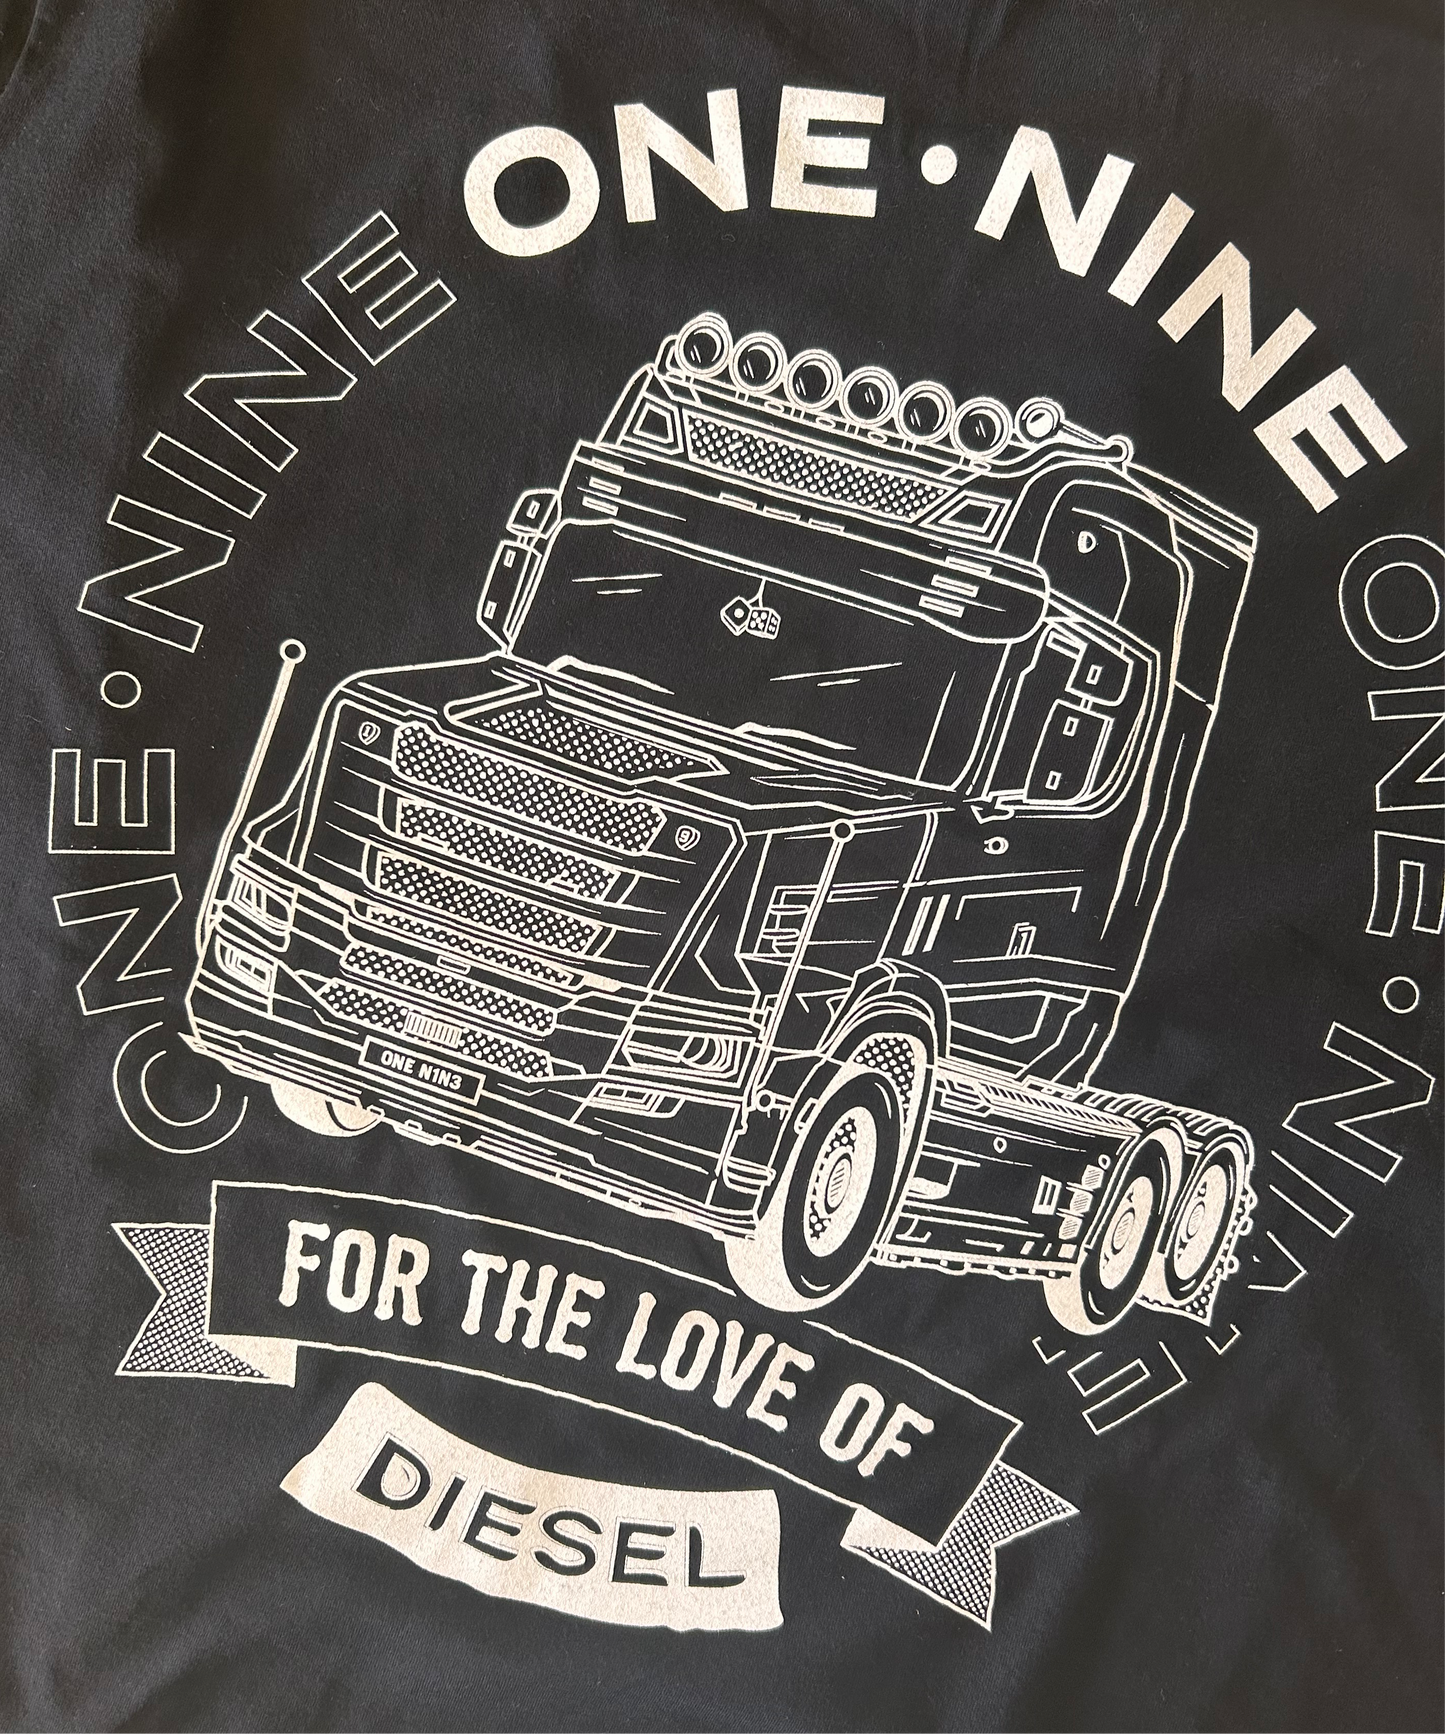 For the love of diesel